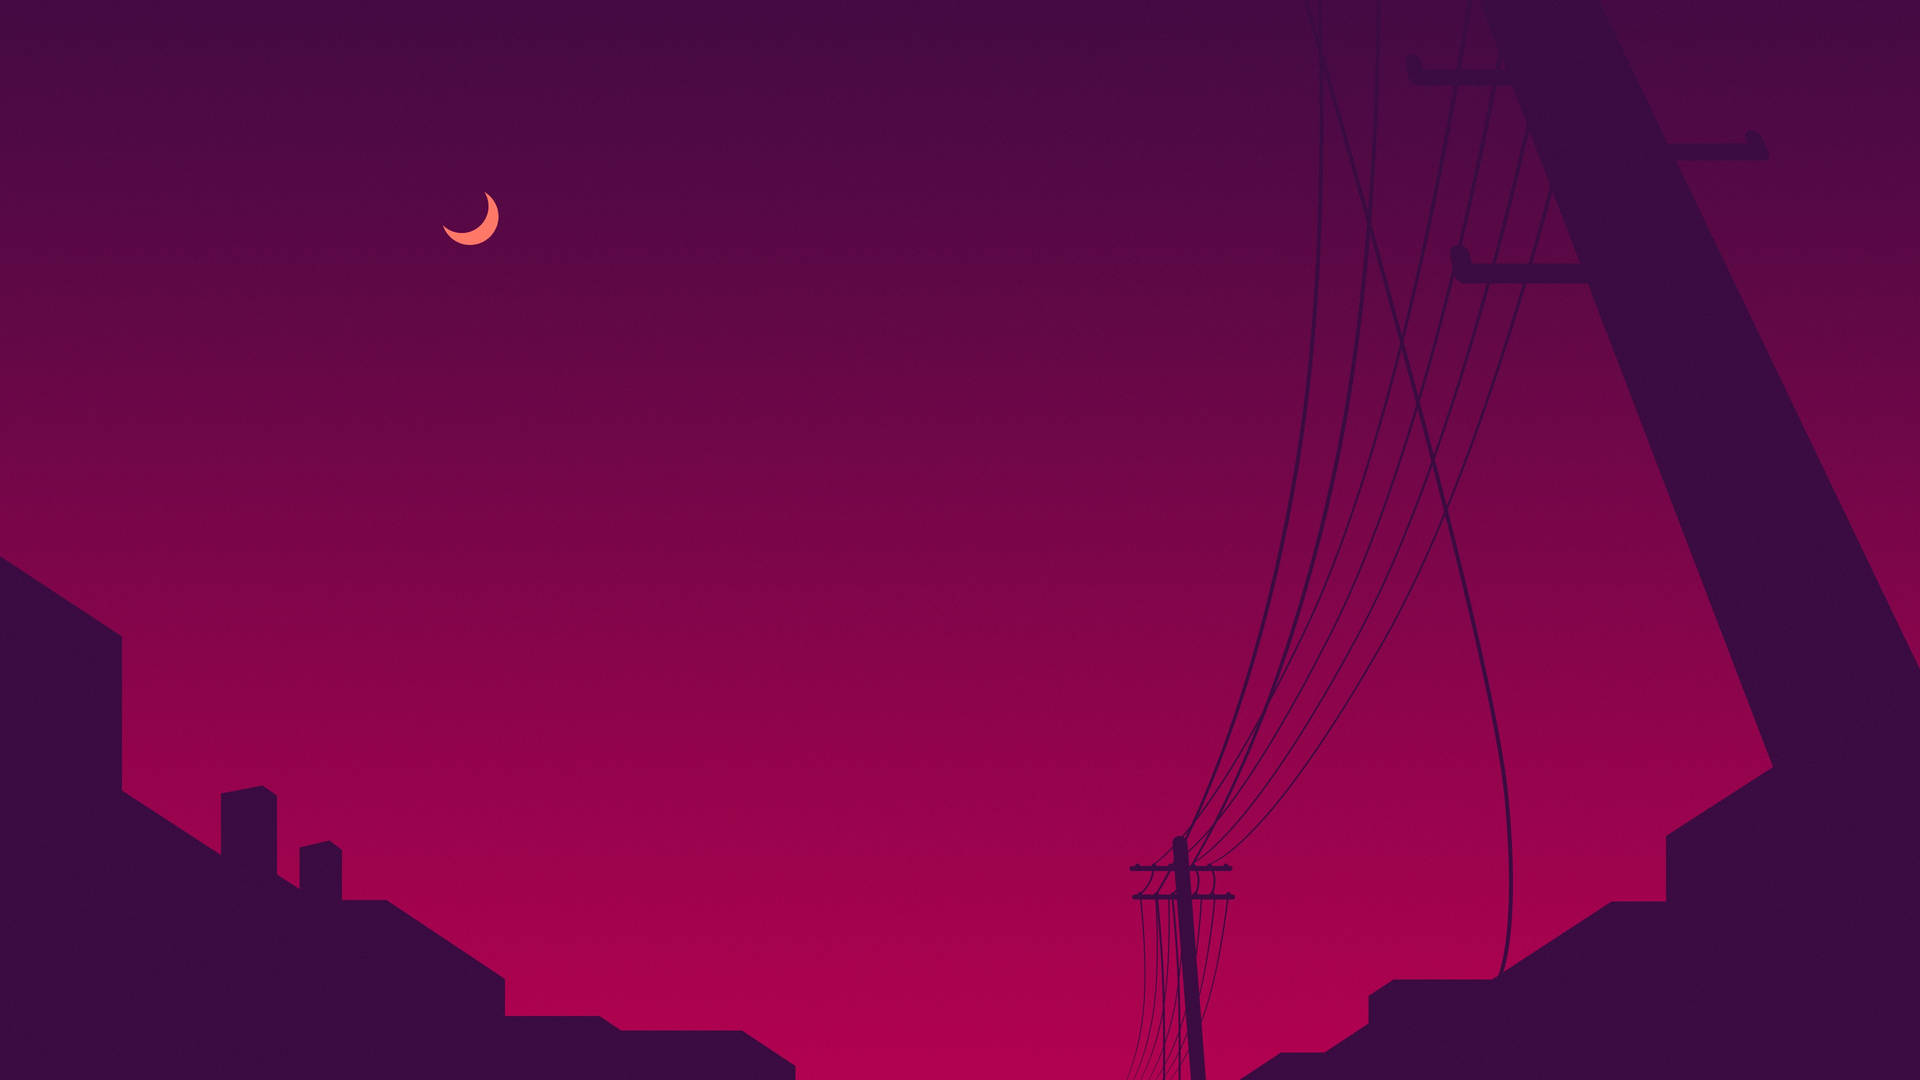 Aesthetic Moon Above The Power Lines